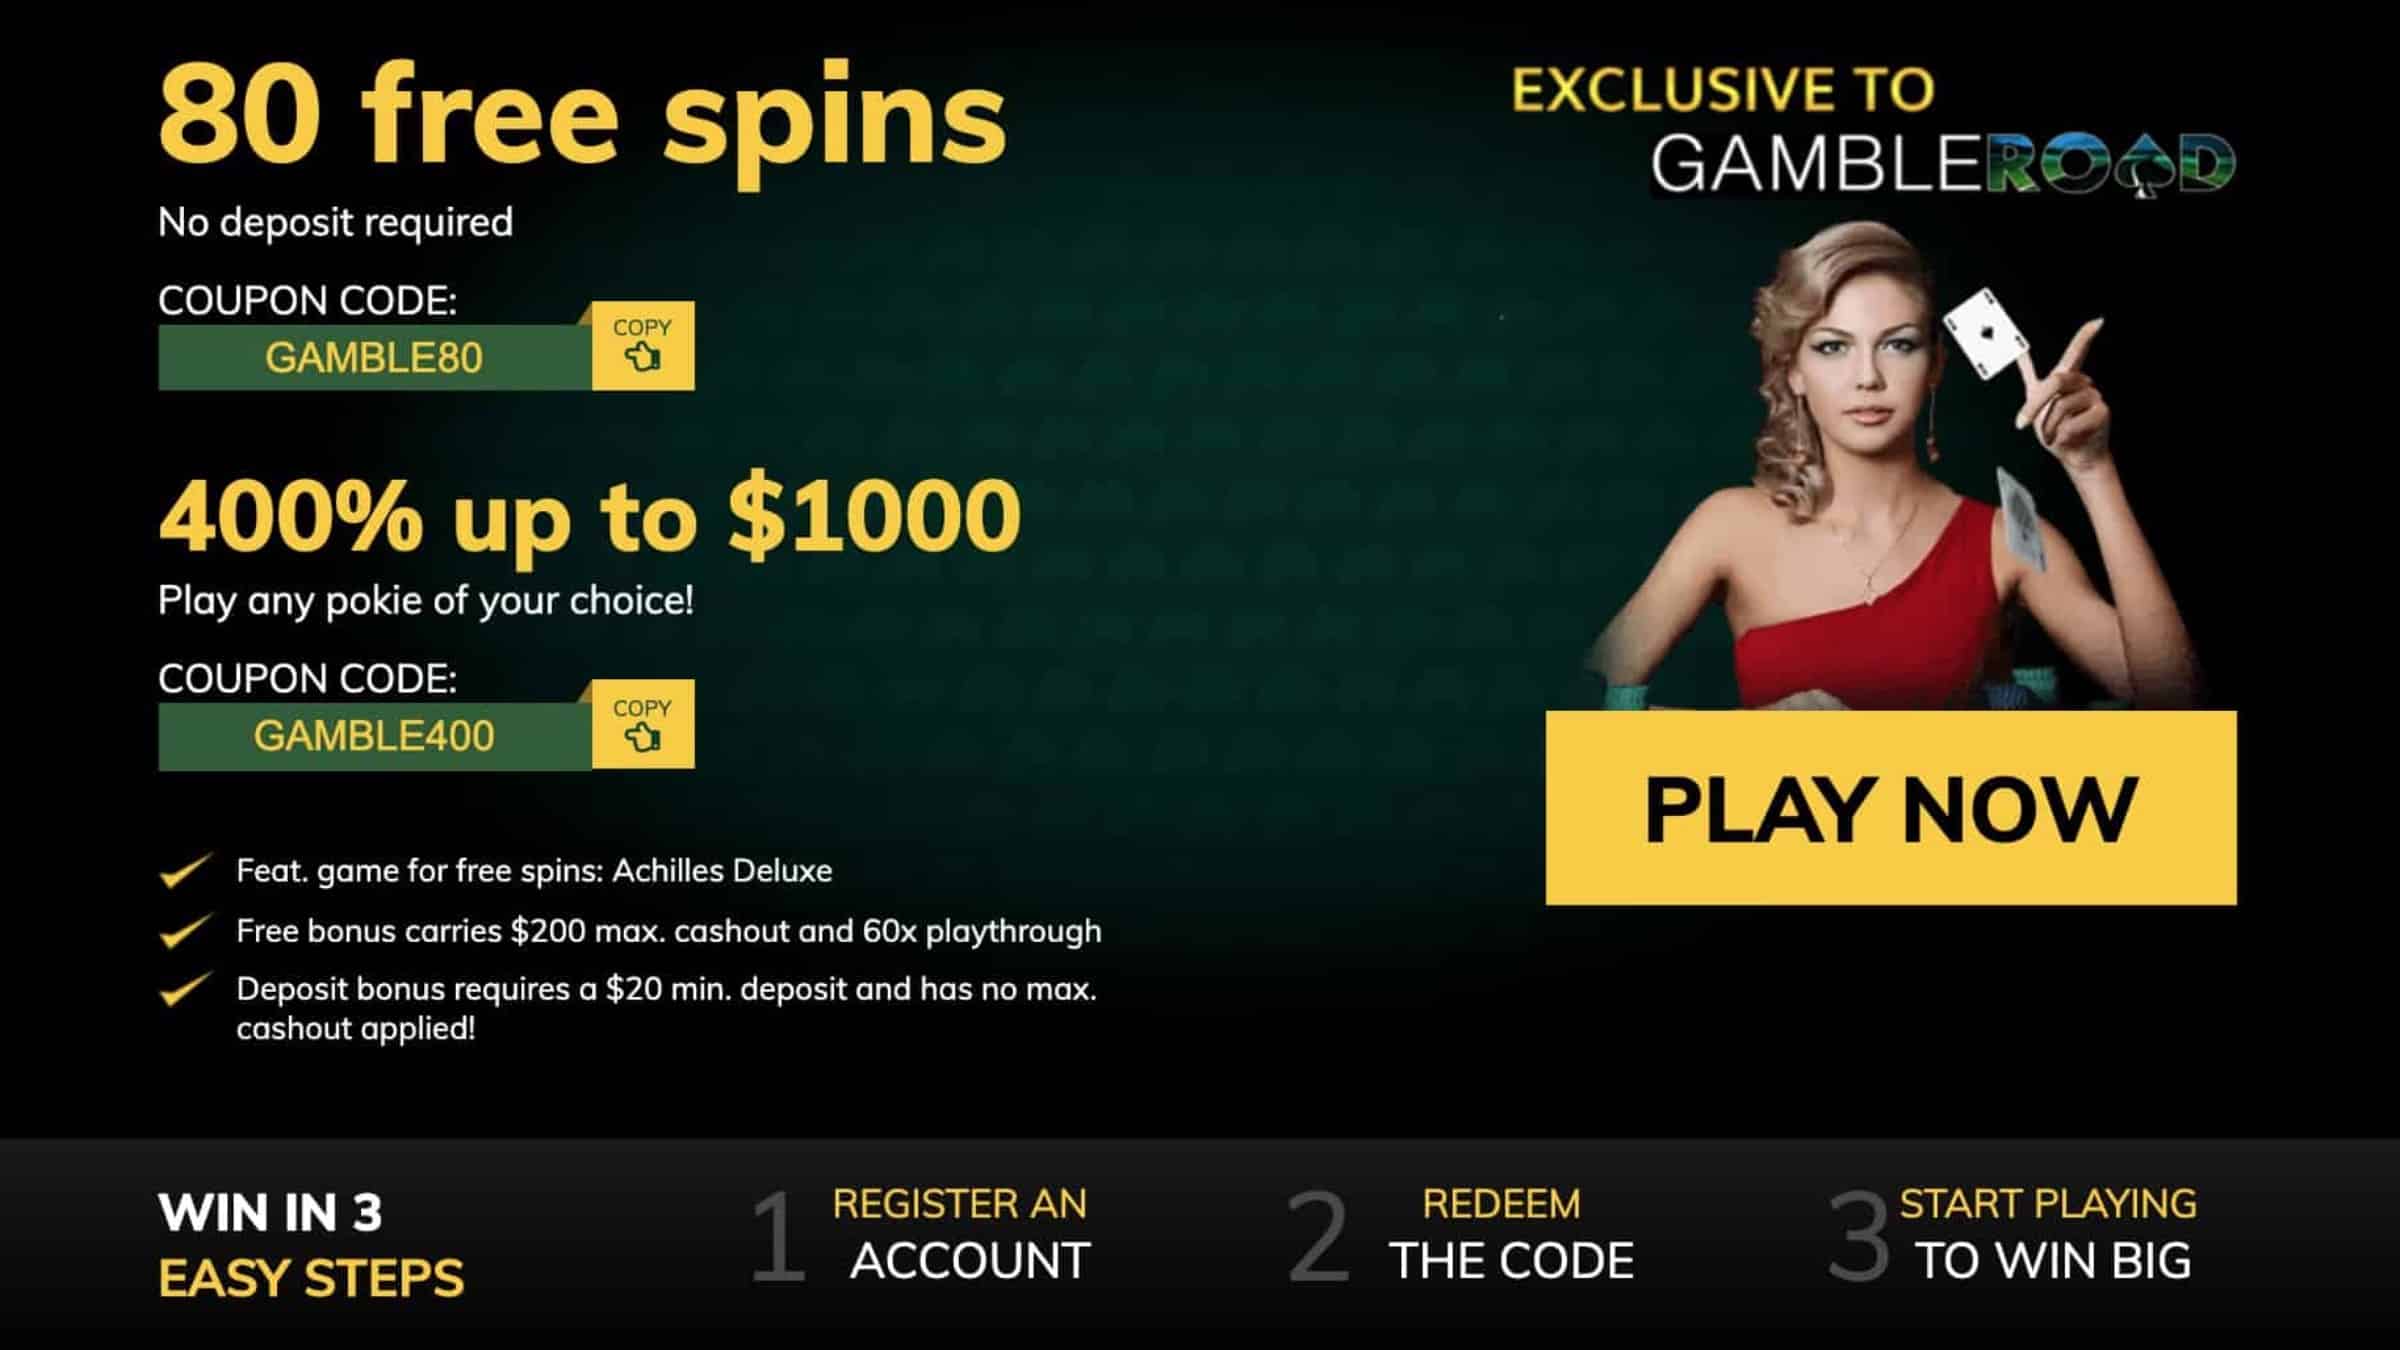 Gday Casino : 25 Free Spins + $250 & 50 Extra Spins on Deposit